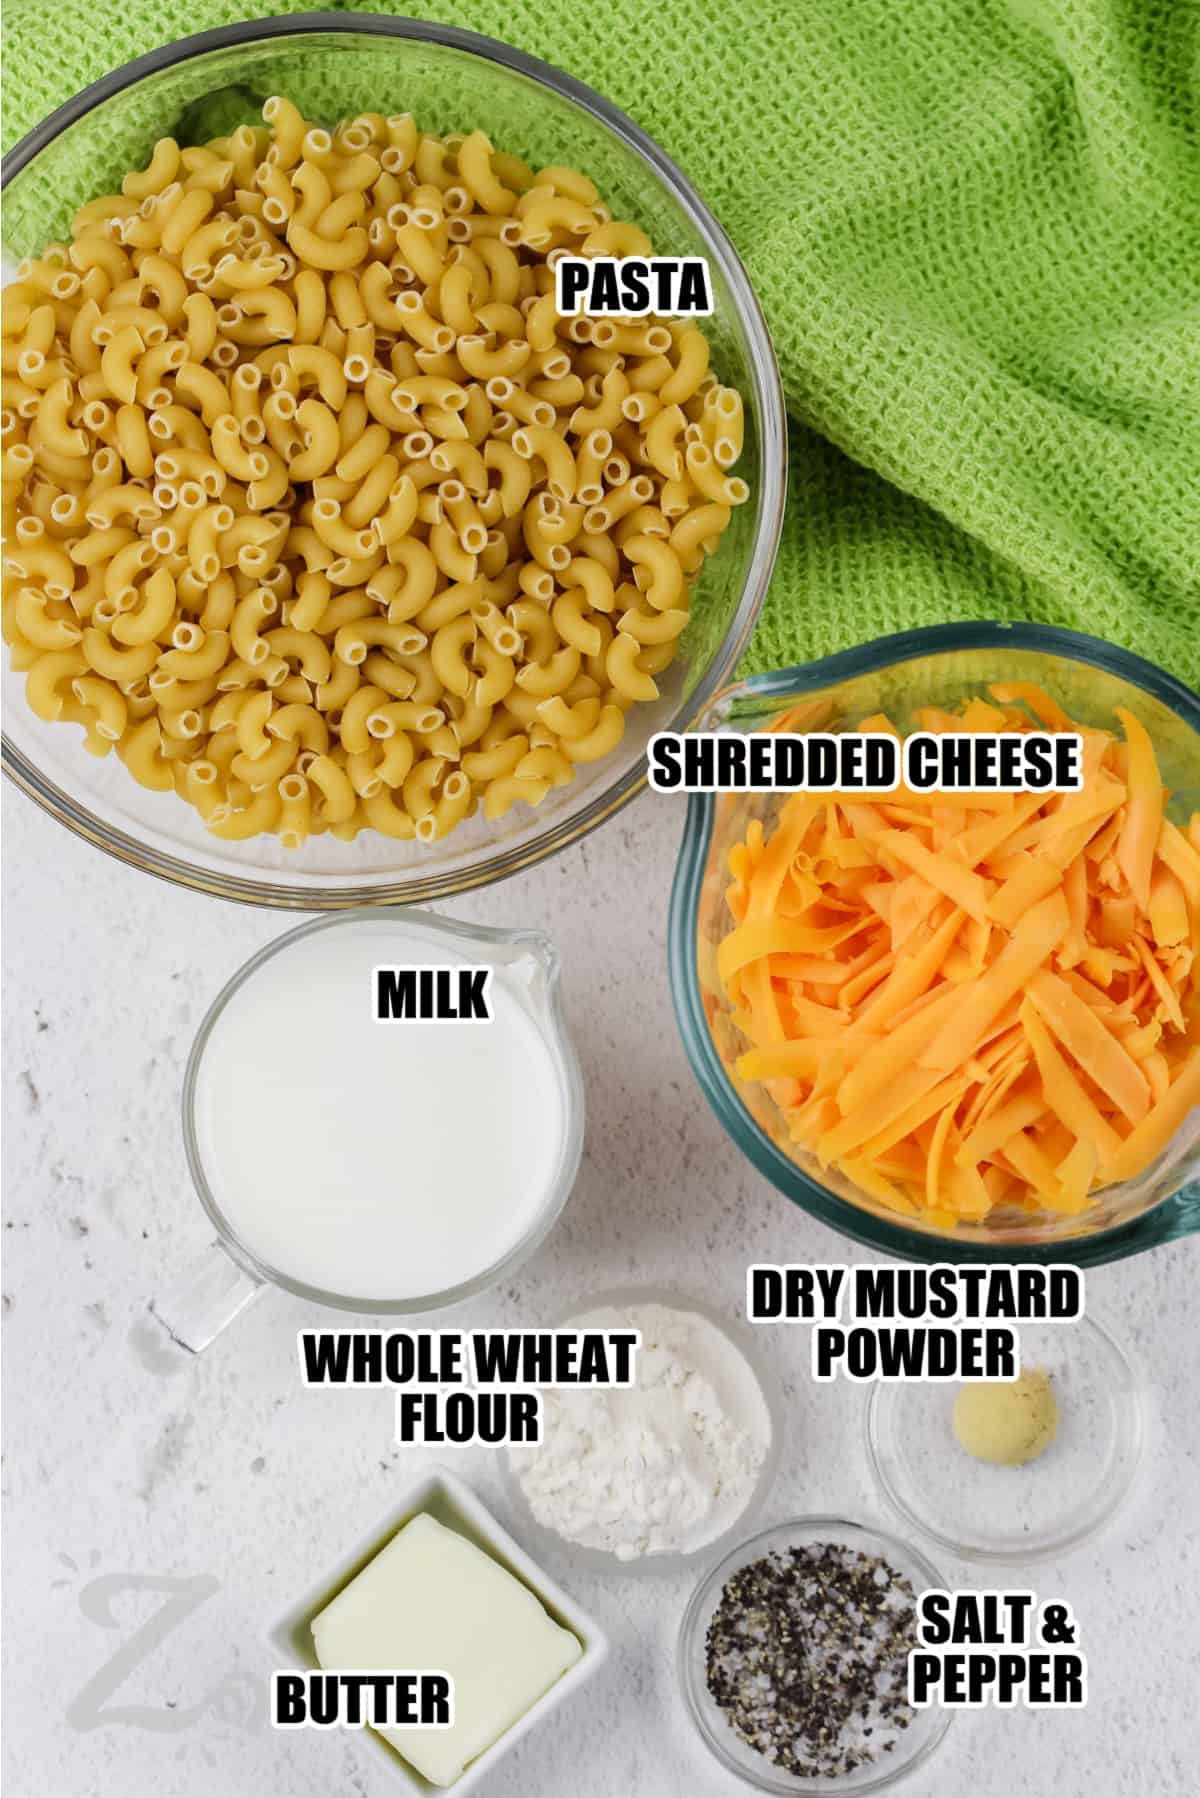 ingredients to make baked macaroni and cheese labeled: pasta, shredded cheese, milk, dry mustard powder, whole wheat flou, butter, salt and pepper